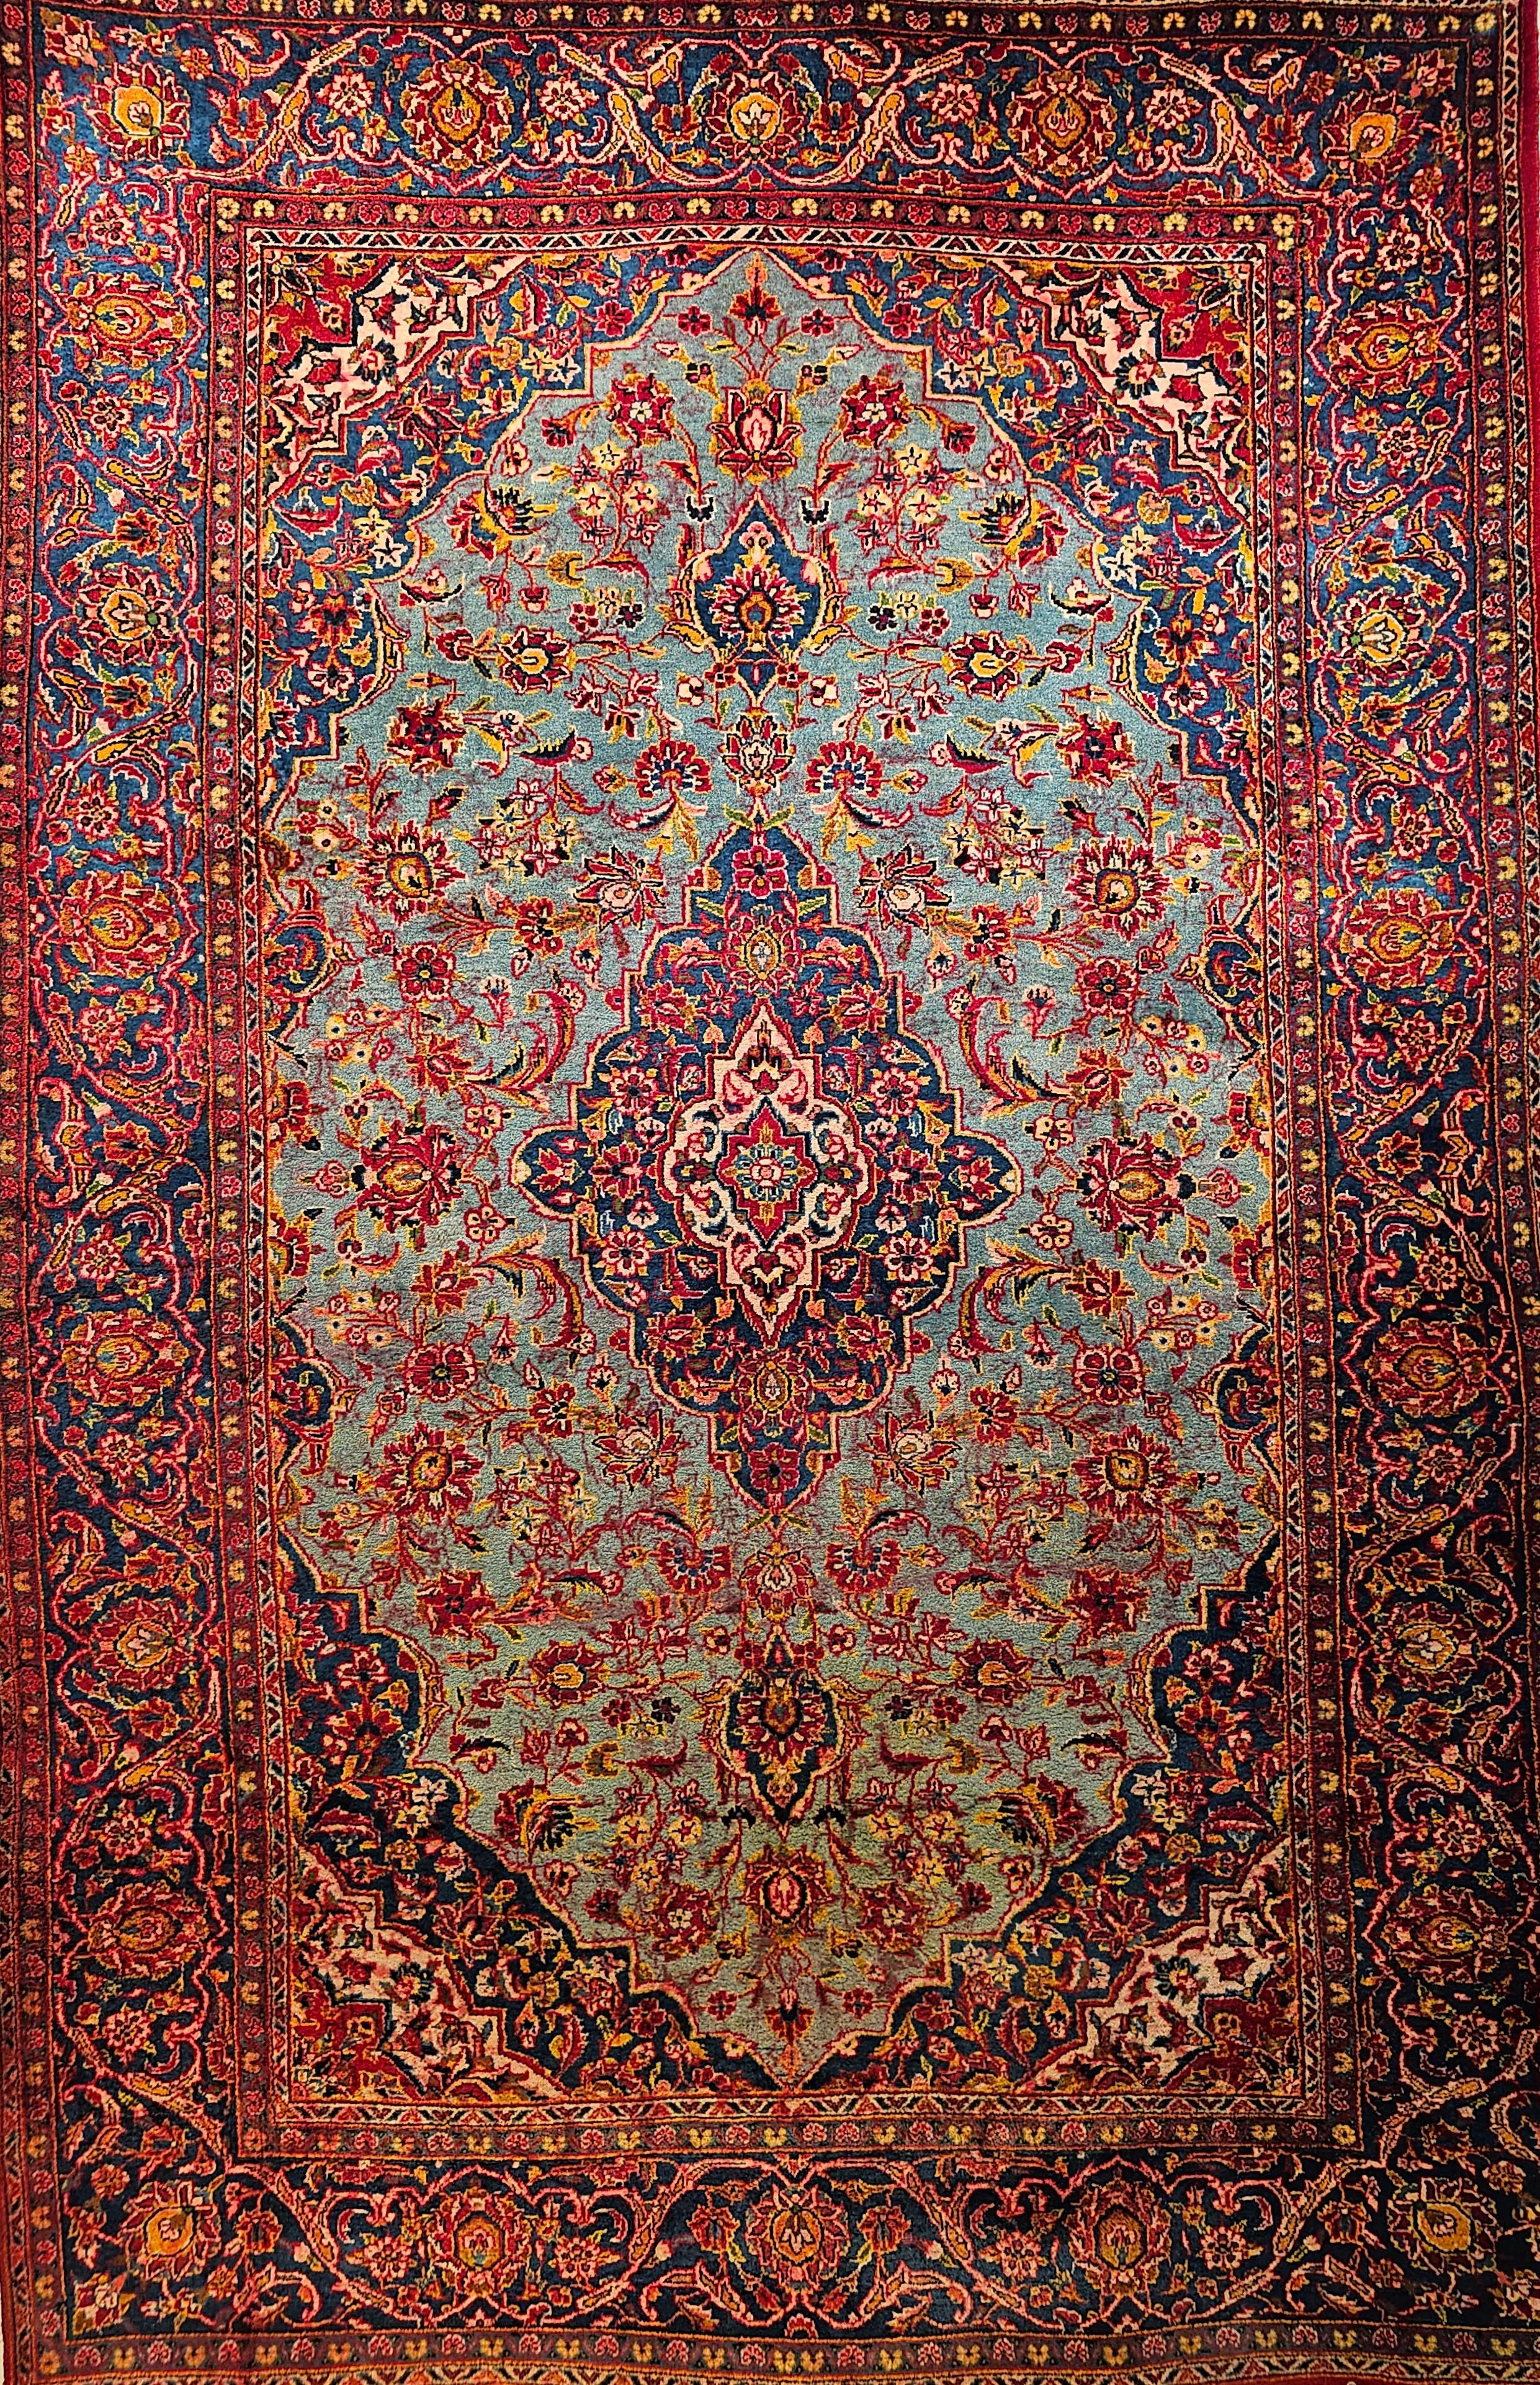 An early 20th century  hand-woven Persian Kashan floral design area rug in a rare turquoise color background.   The classical design and luminous, resilient wool quality of this outstanding vintage Persian Kashan carpet create an impression of